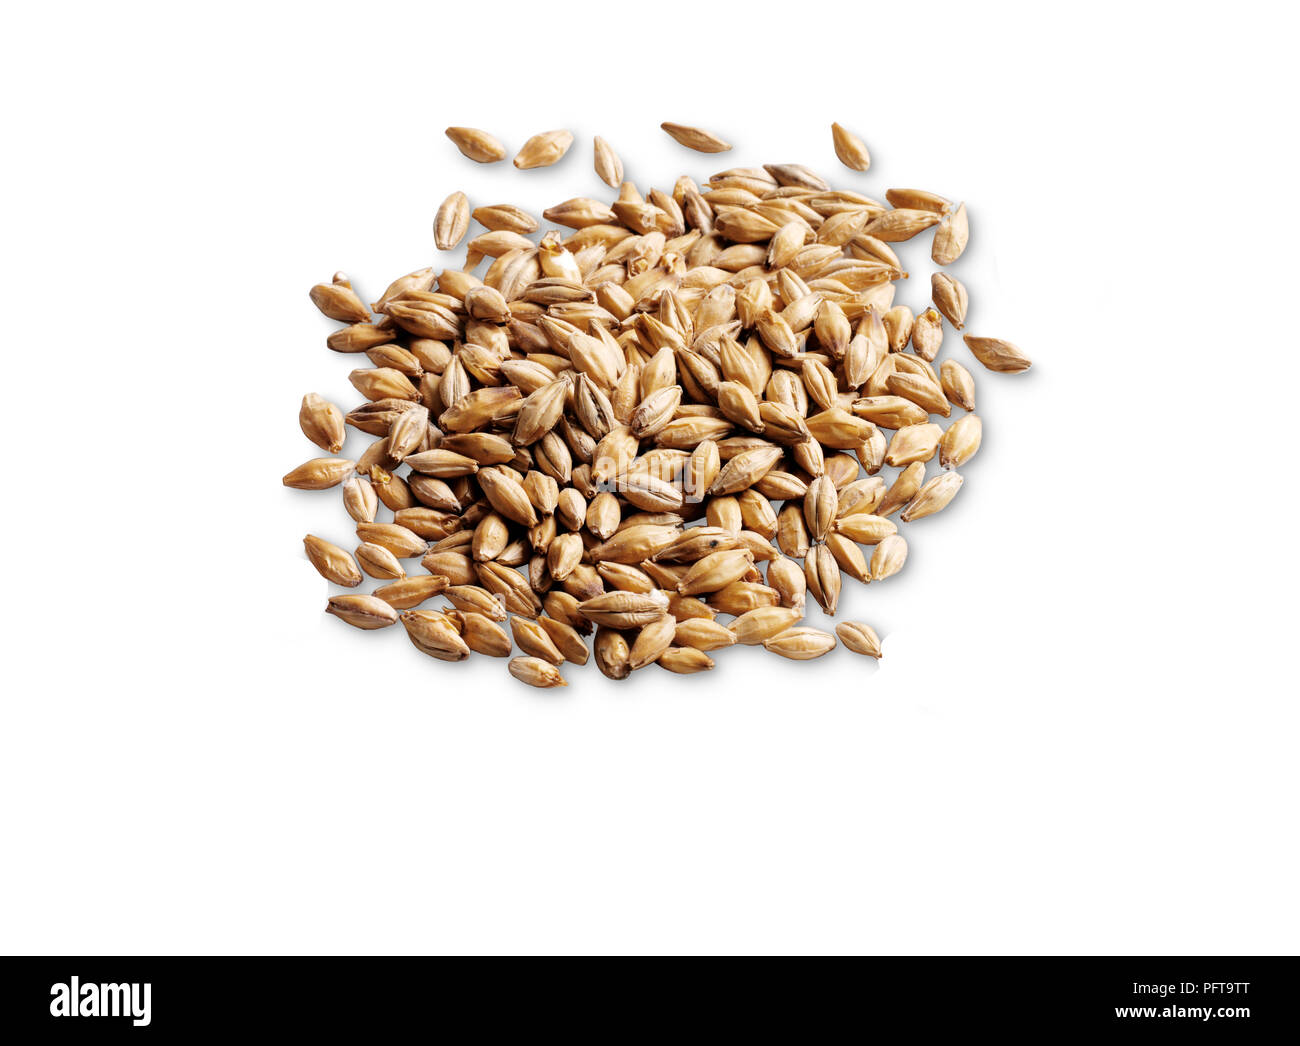 Pale malt for brewing beer Stock Photo